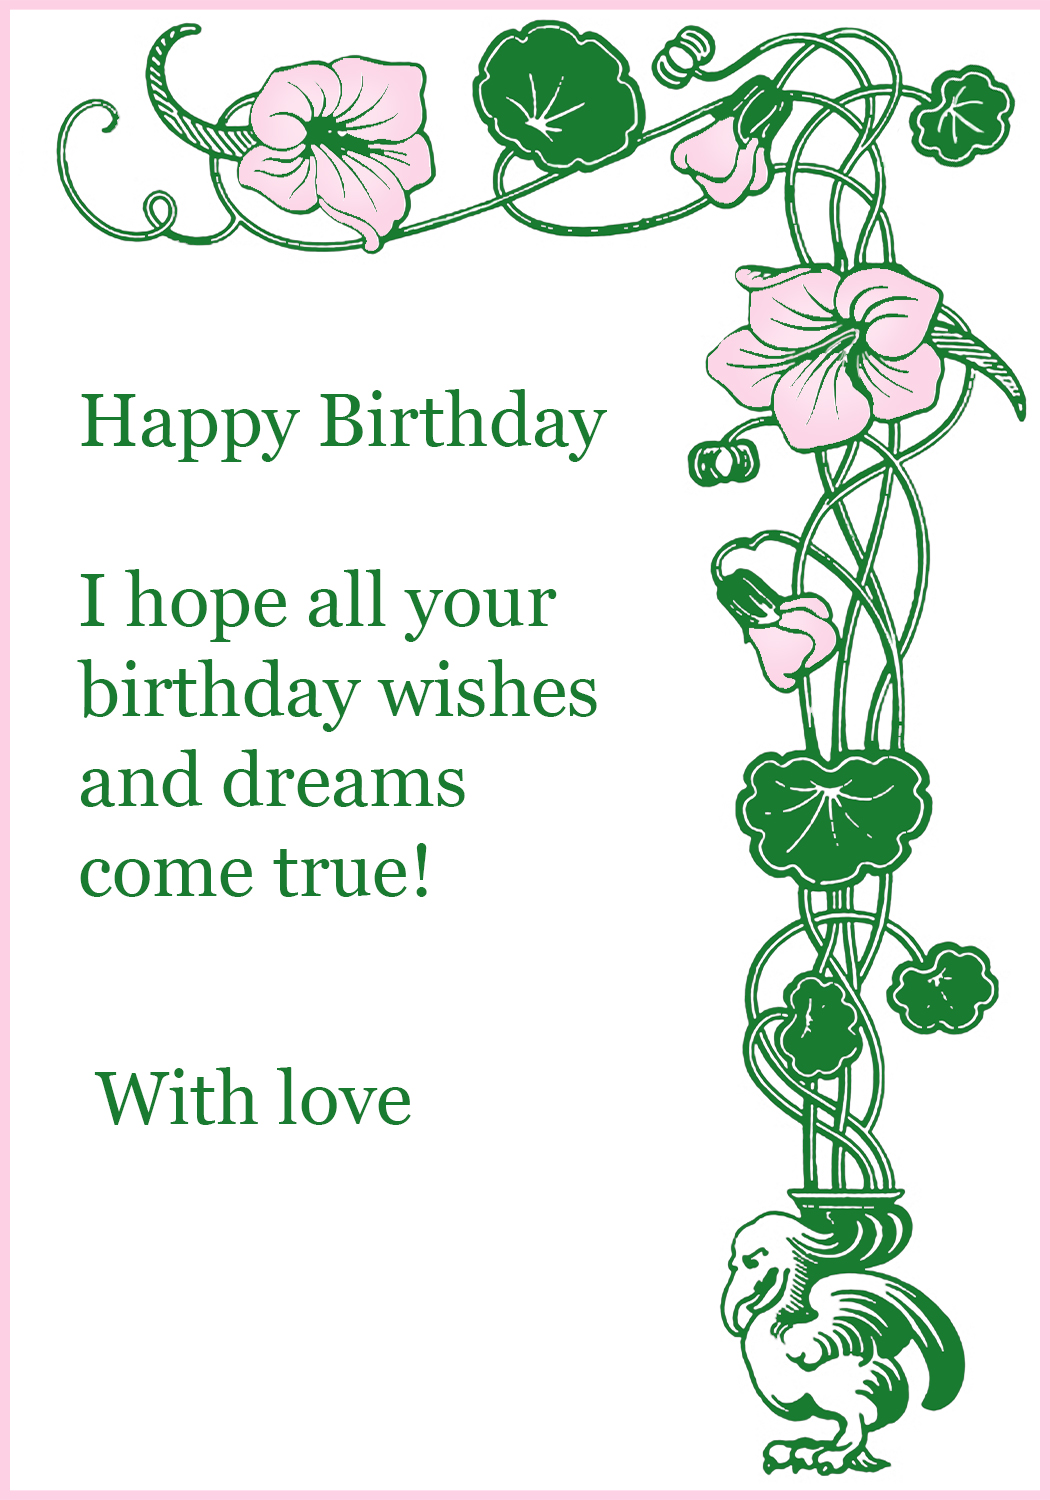 printable-happy-birthday-card-download-birthday-card-etsy-in-2021